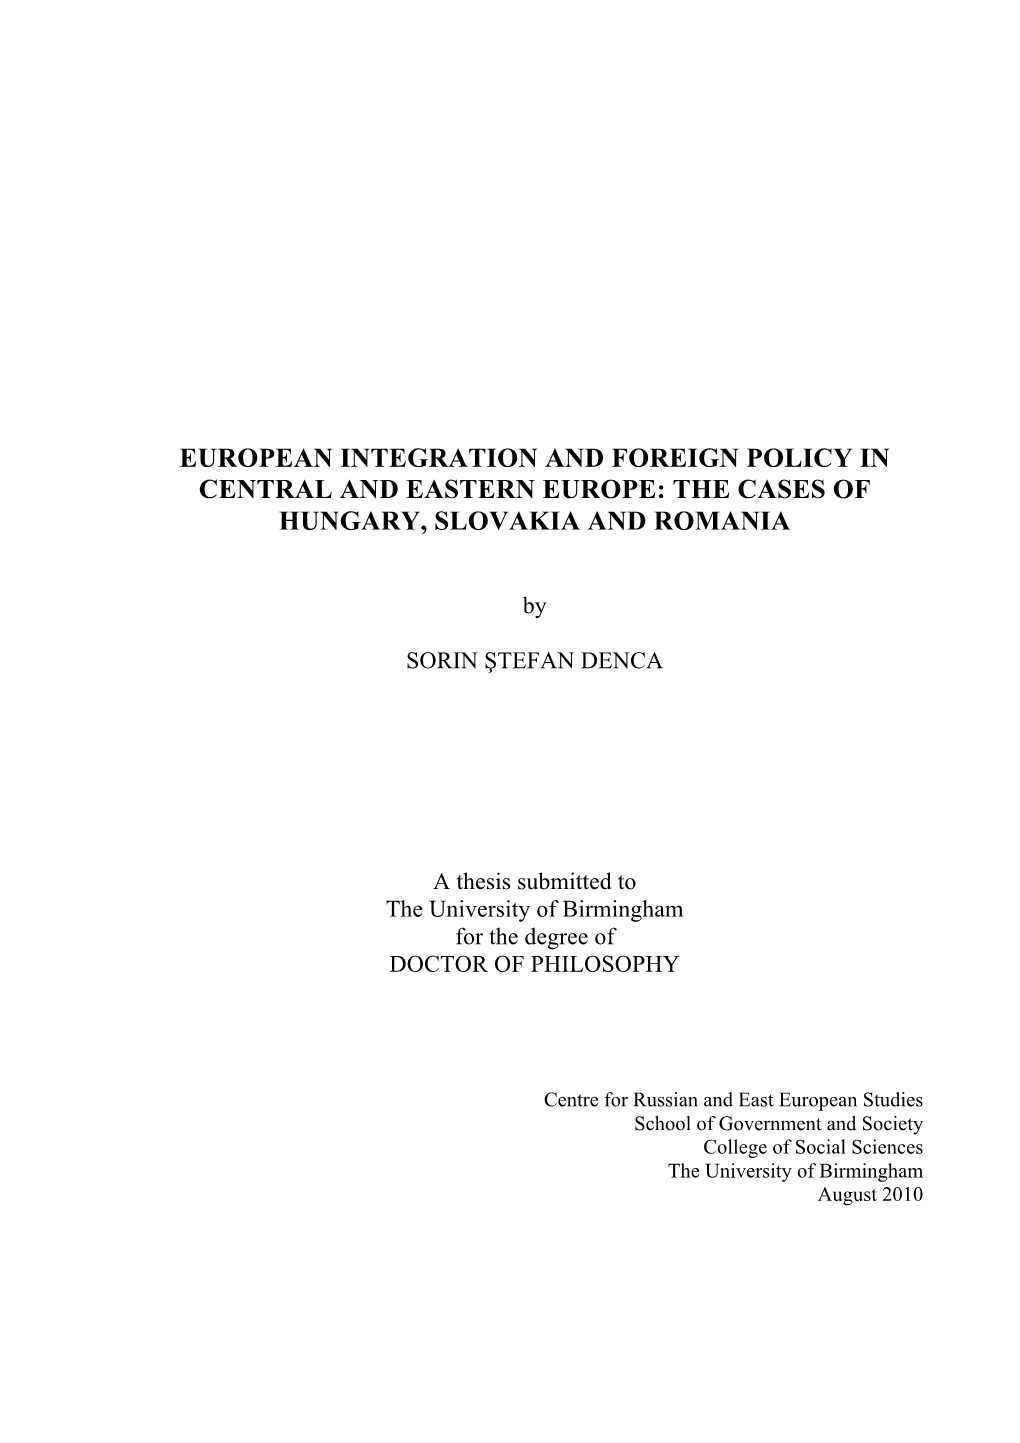 European Integration and Foreign Policy in Central and Eastern Europe: the Cases of Hungary, Slovakia and Romania